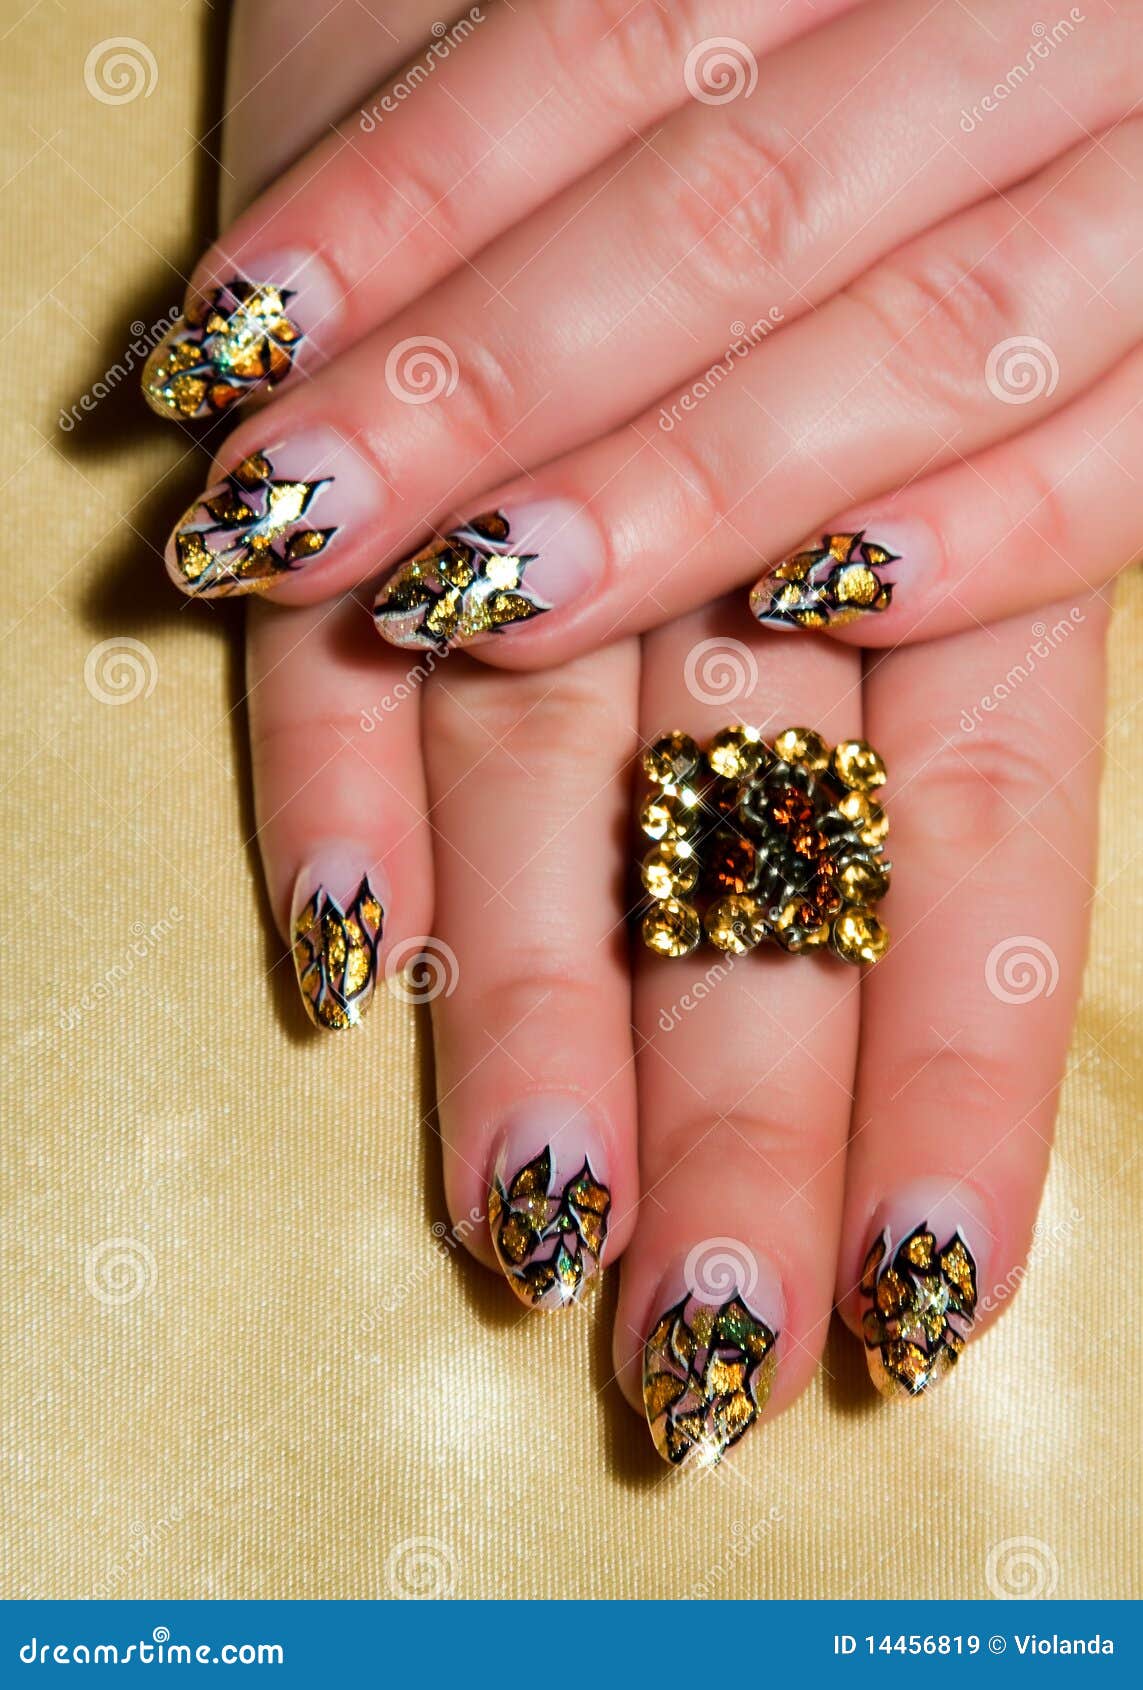 beautiful nails with art